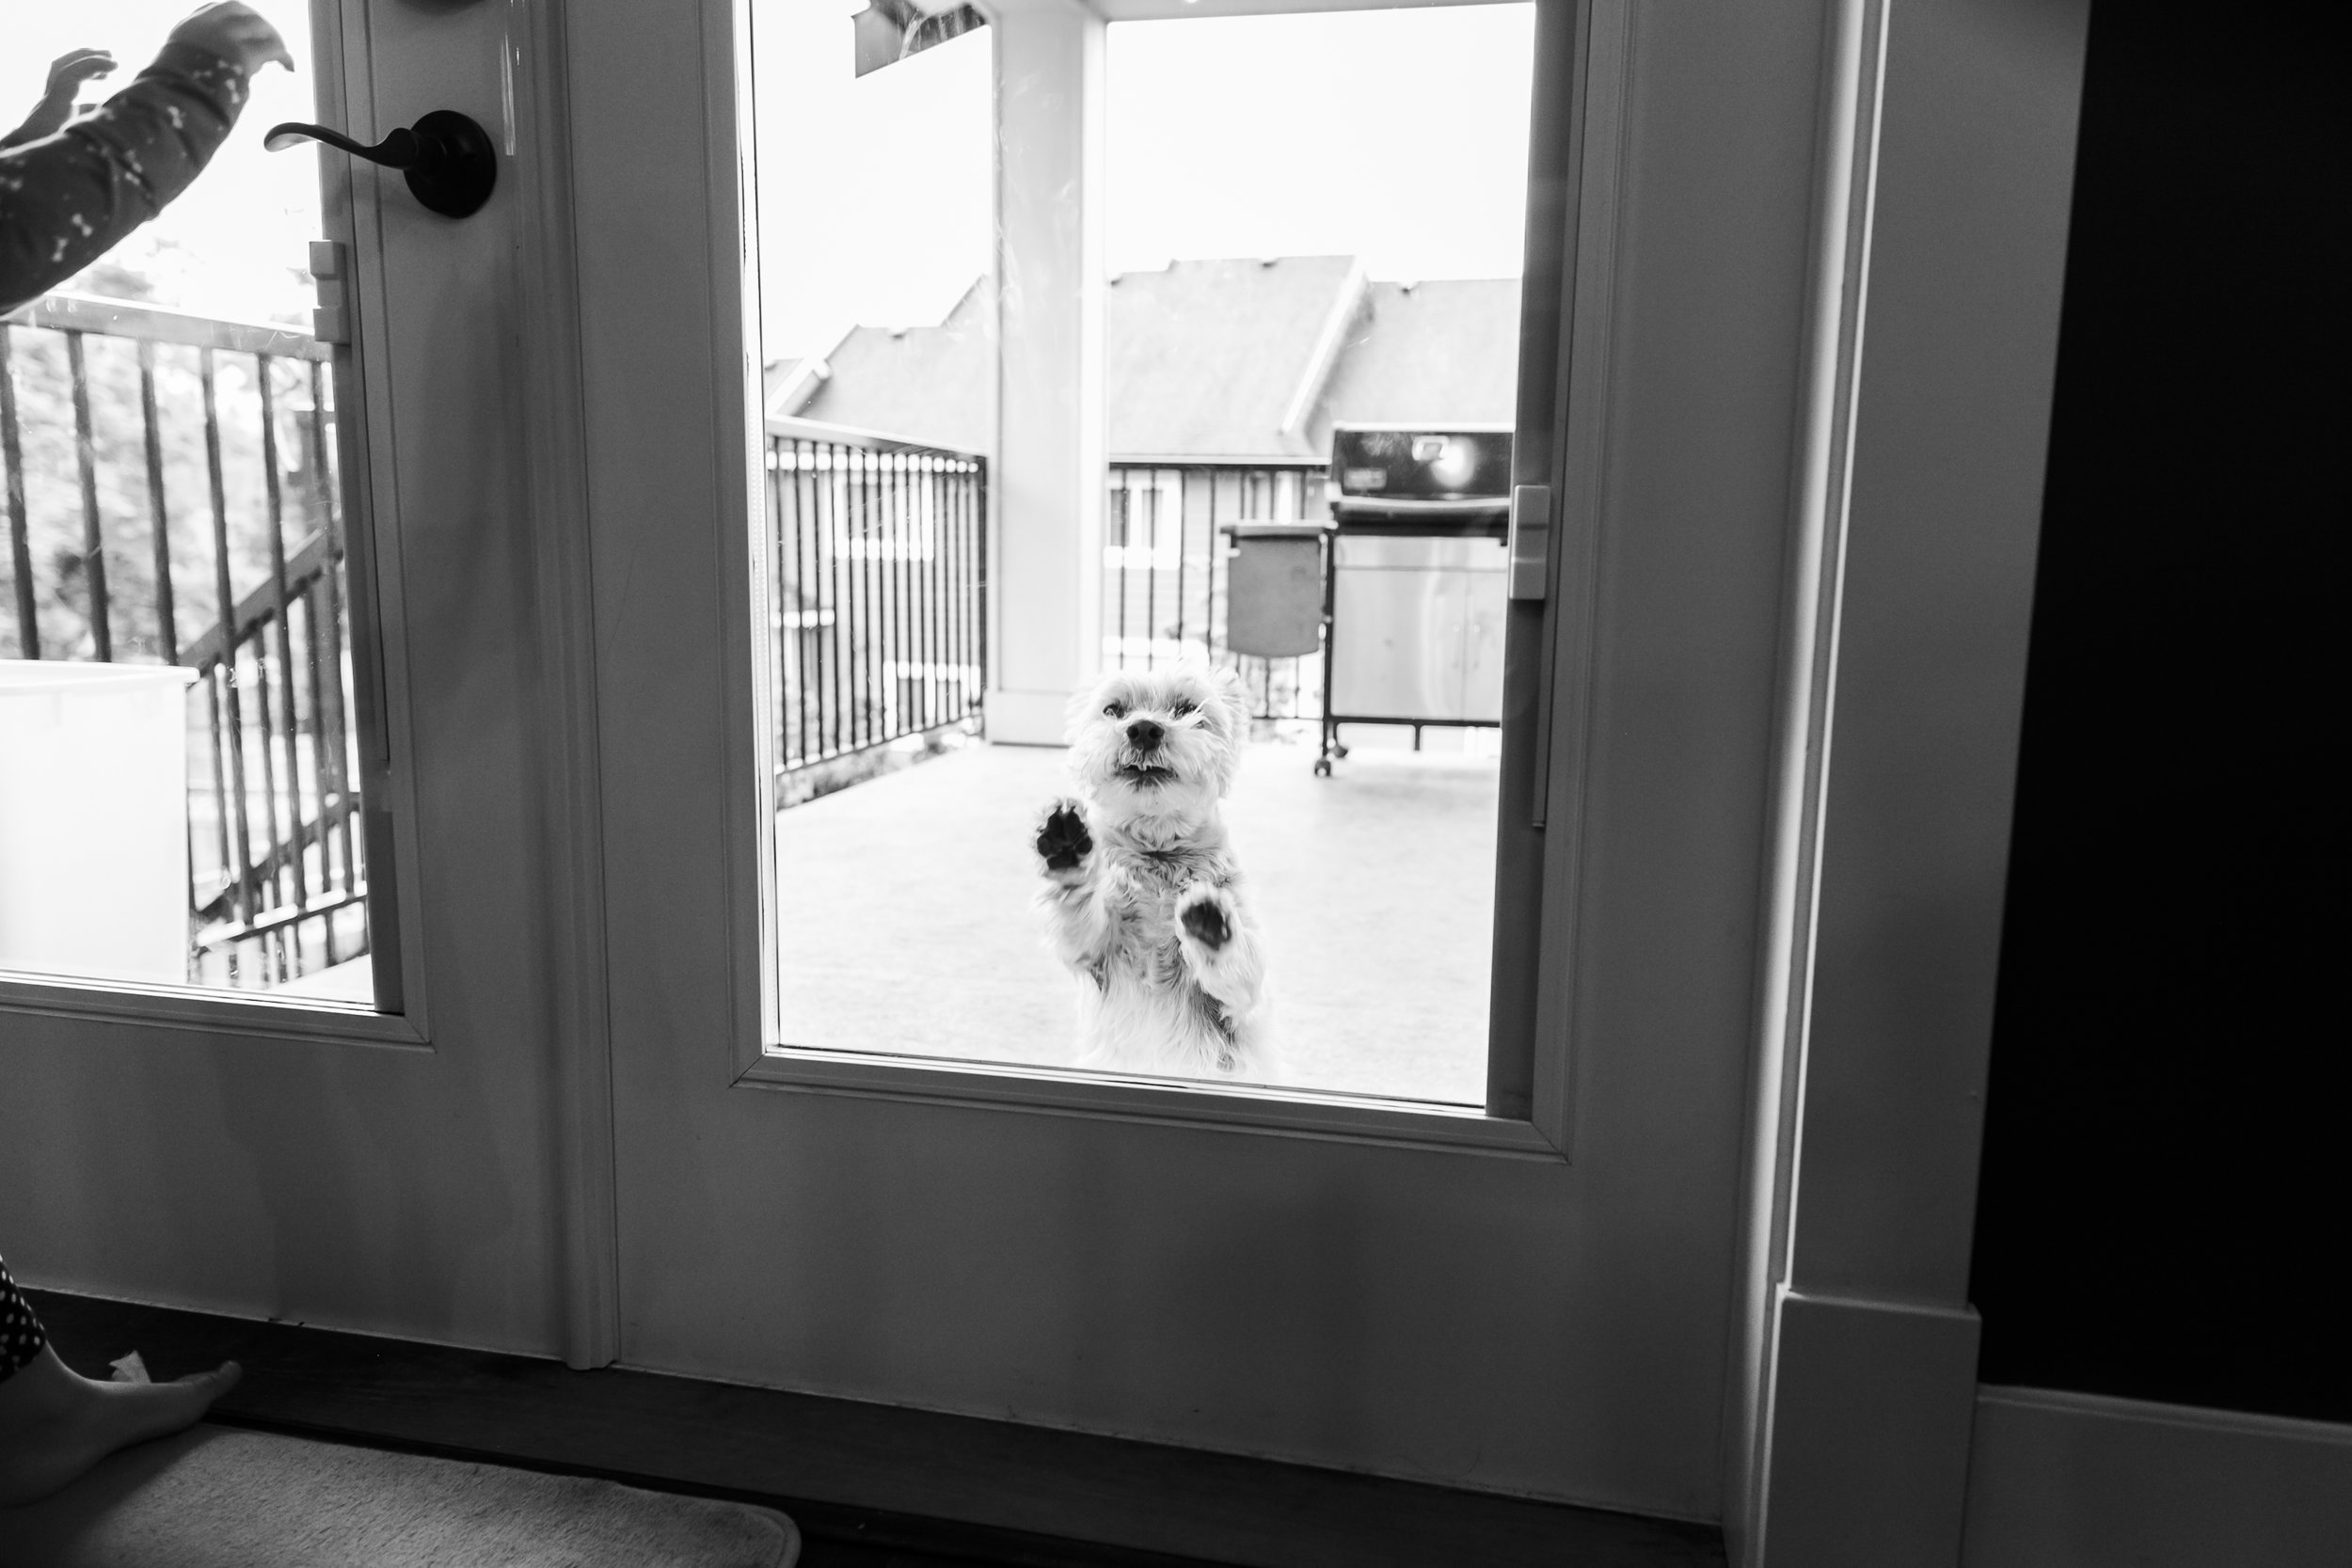 Surrey Family photographer. Vancouver family photographer, klutch Photography, documentary photography, candid photography, dog in window